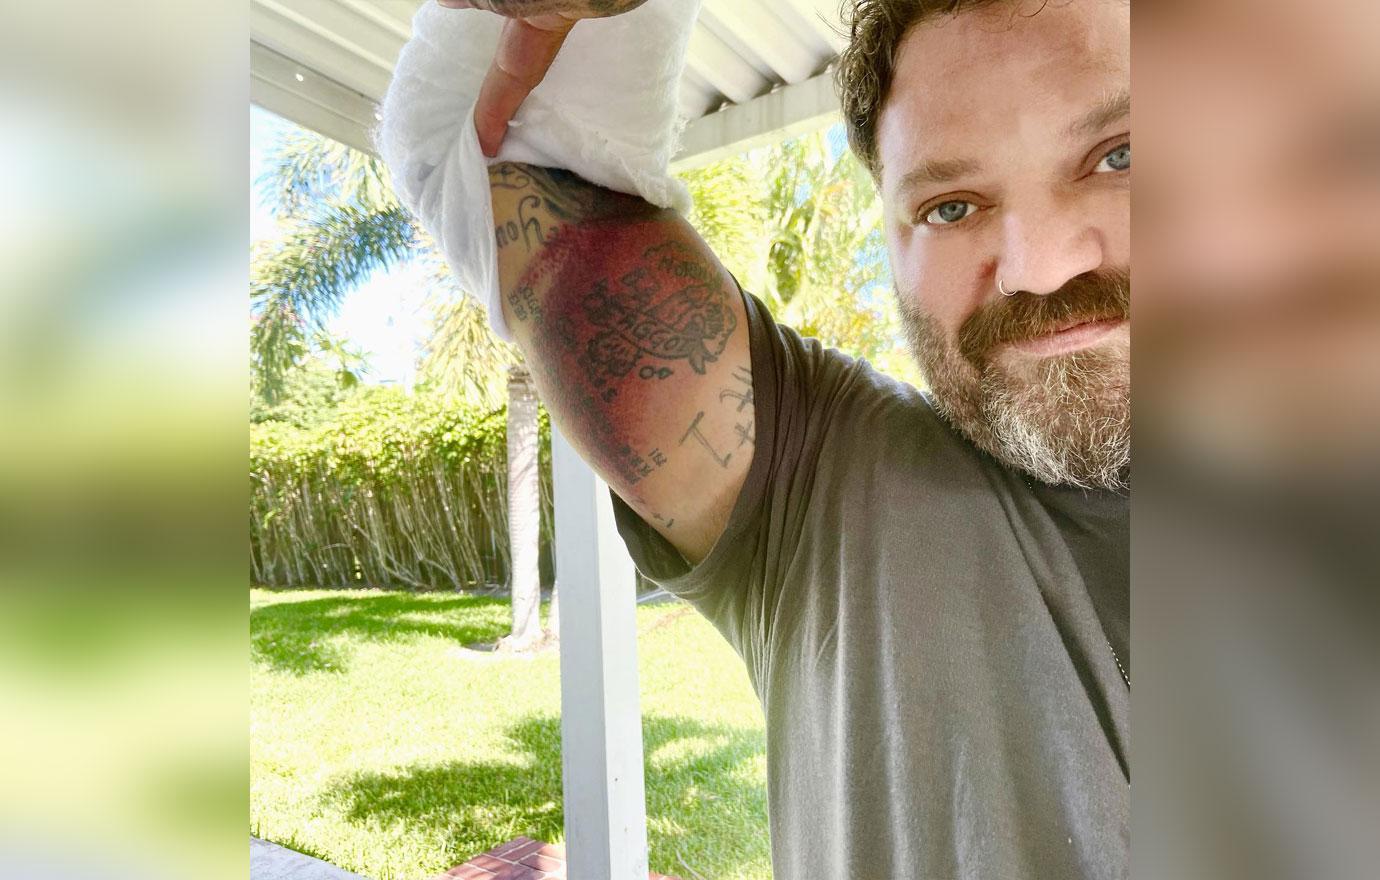 Jackass Alum Bam Margera Reported Missing After Fleeing Rehab Center hq image